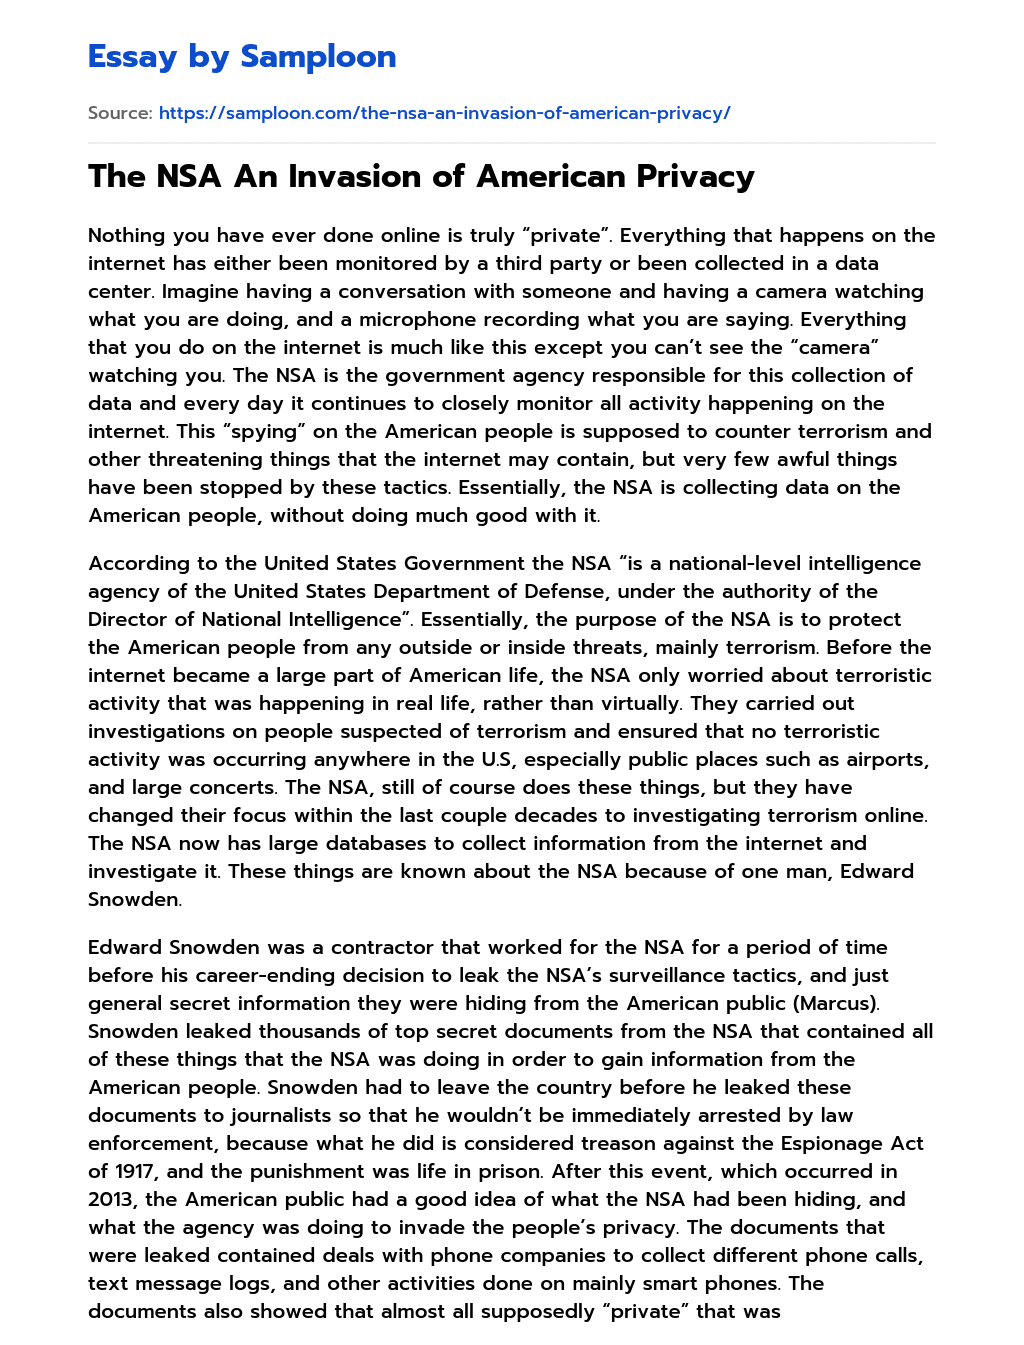 The NSA  An Invasion of American Privacy essay